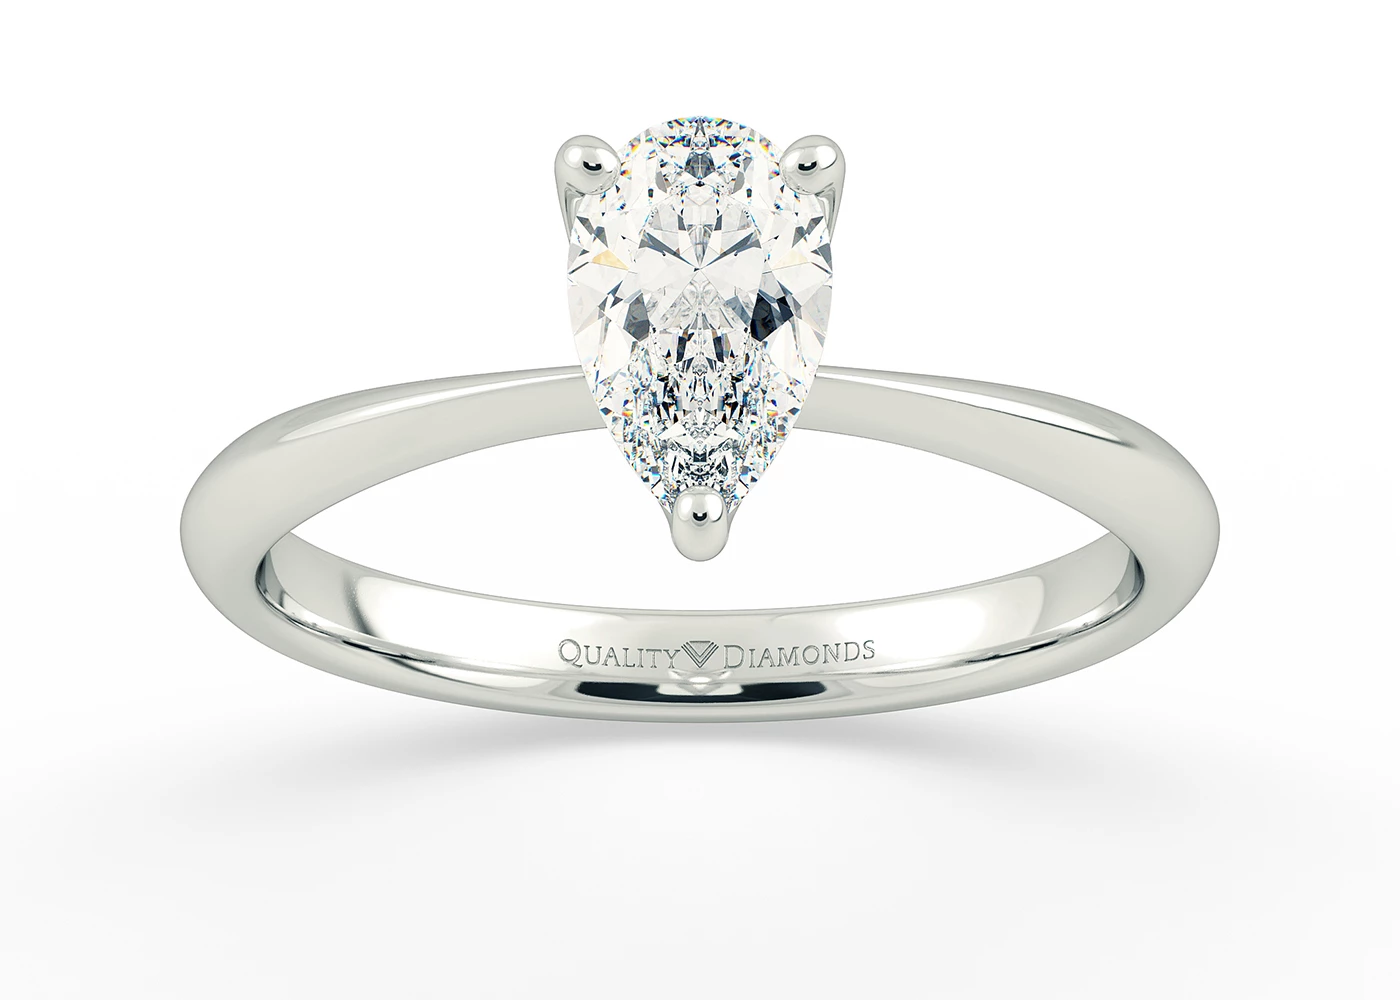 One Carat Lab Grown Pear Solitaire Diamond Engagement Ring in Platinum 950